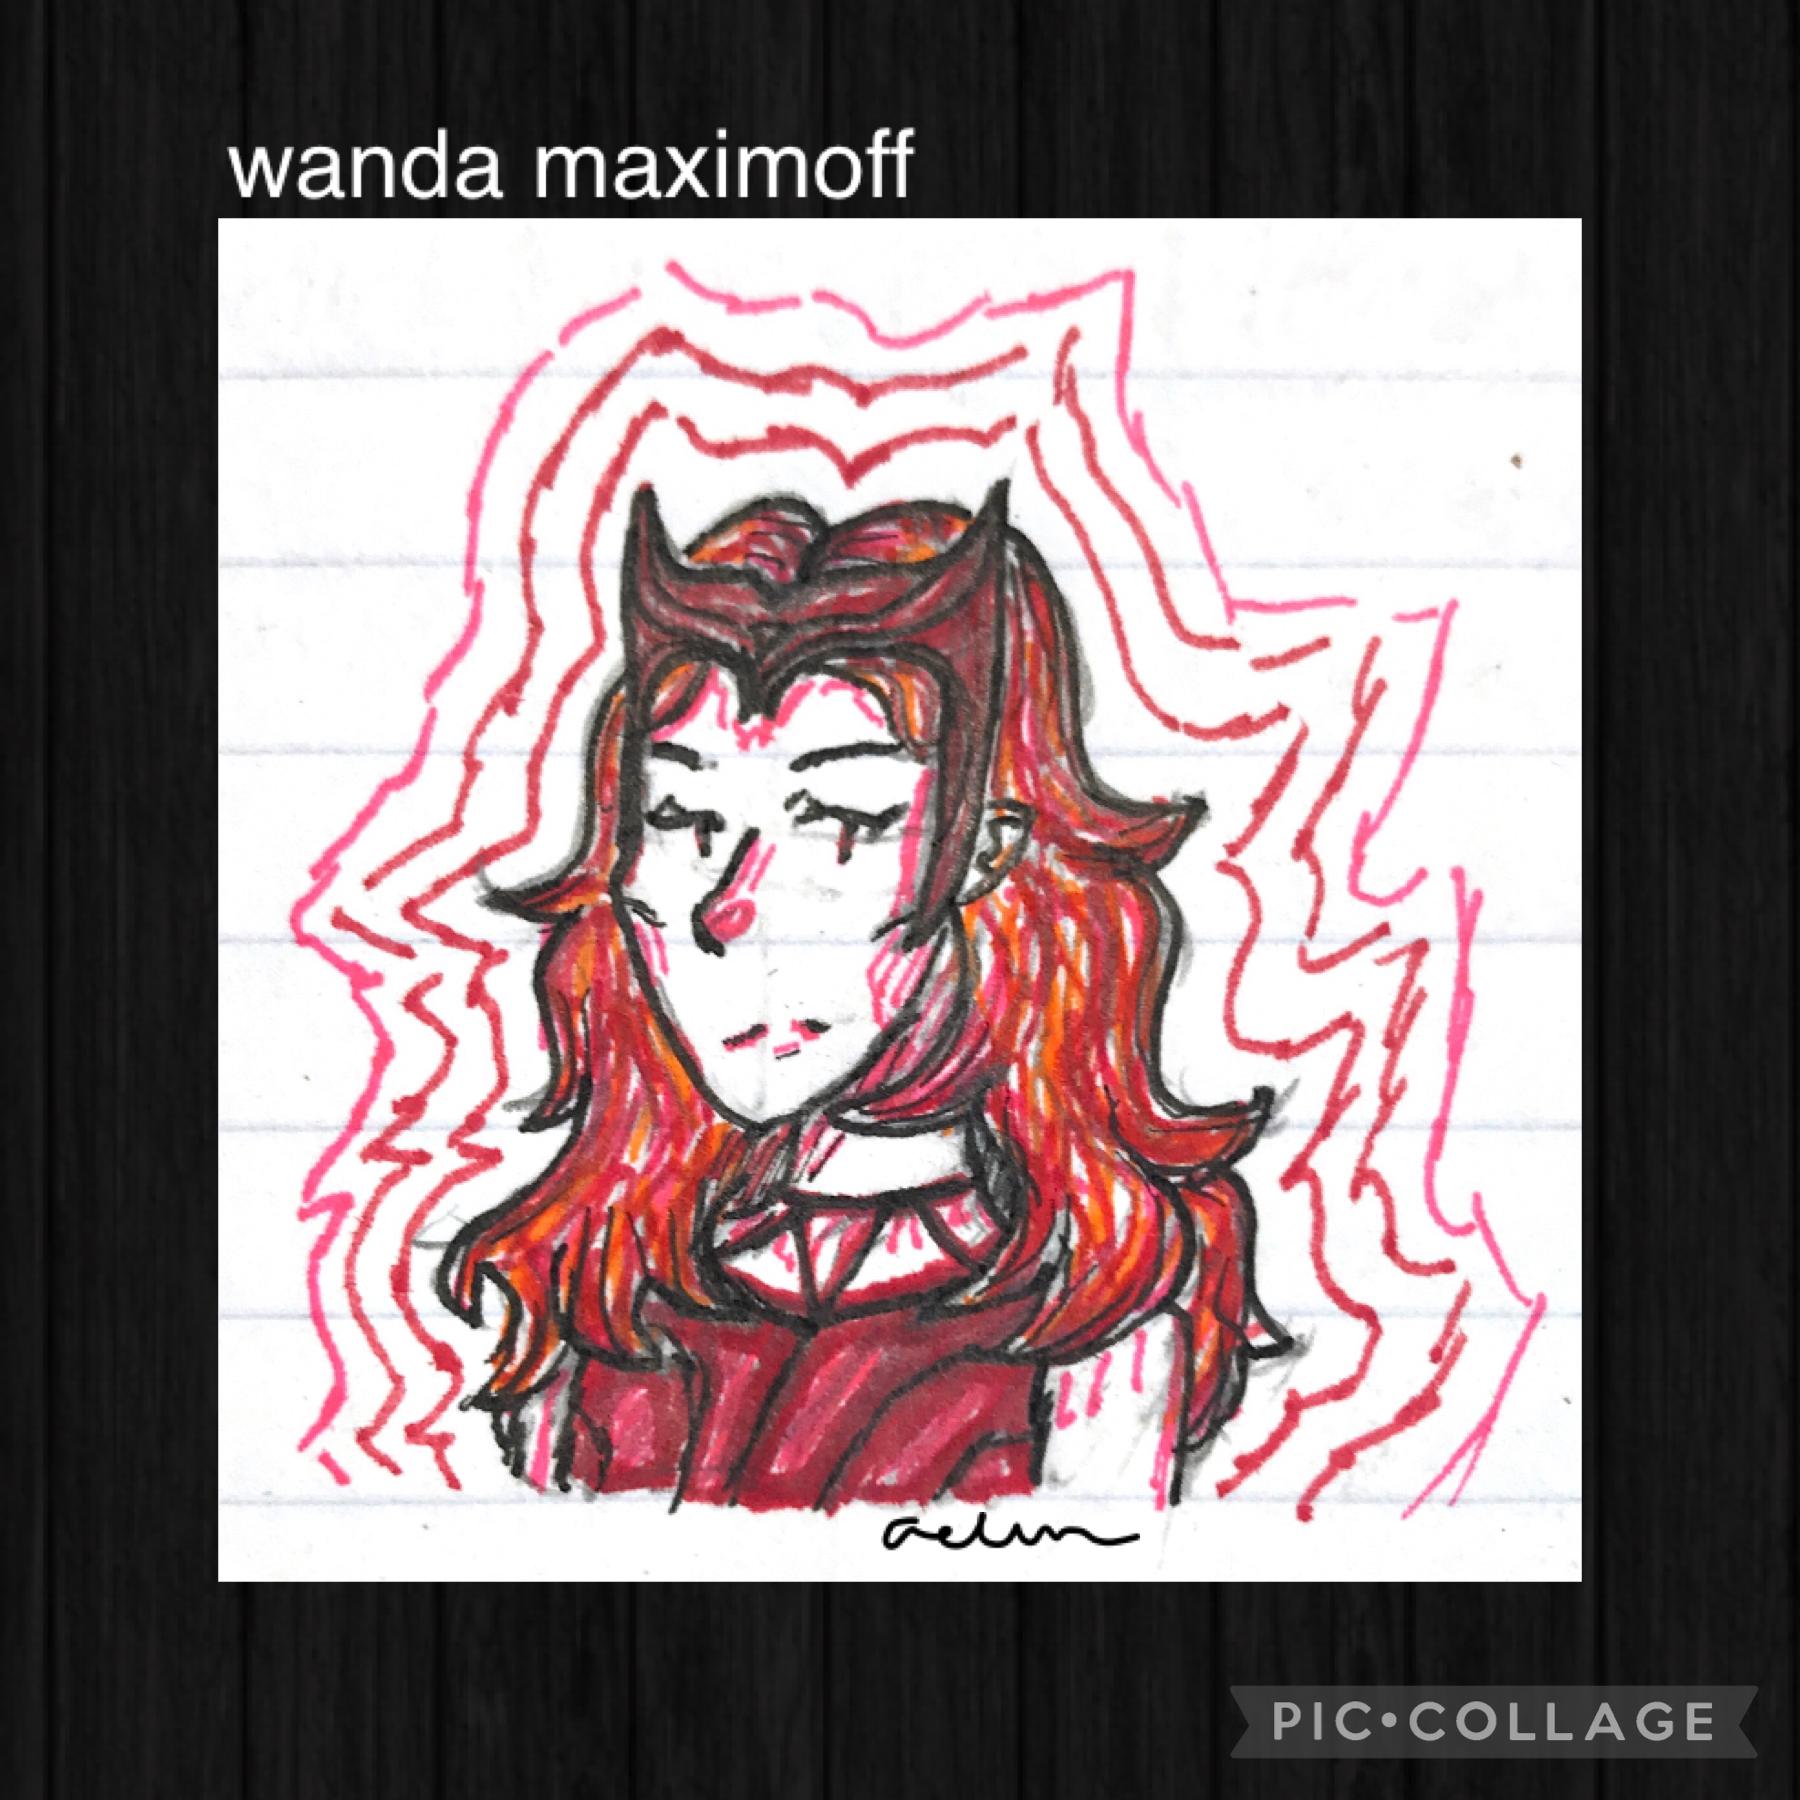 eeeee (tap)

aaah the end of wandavision was 👌!!! also wanda’s scarlet witch outfit definitely didn’t  make me question my s✔️xual orientation again shhhh